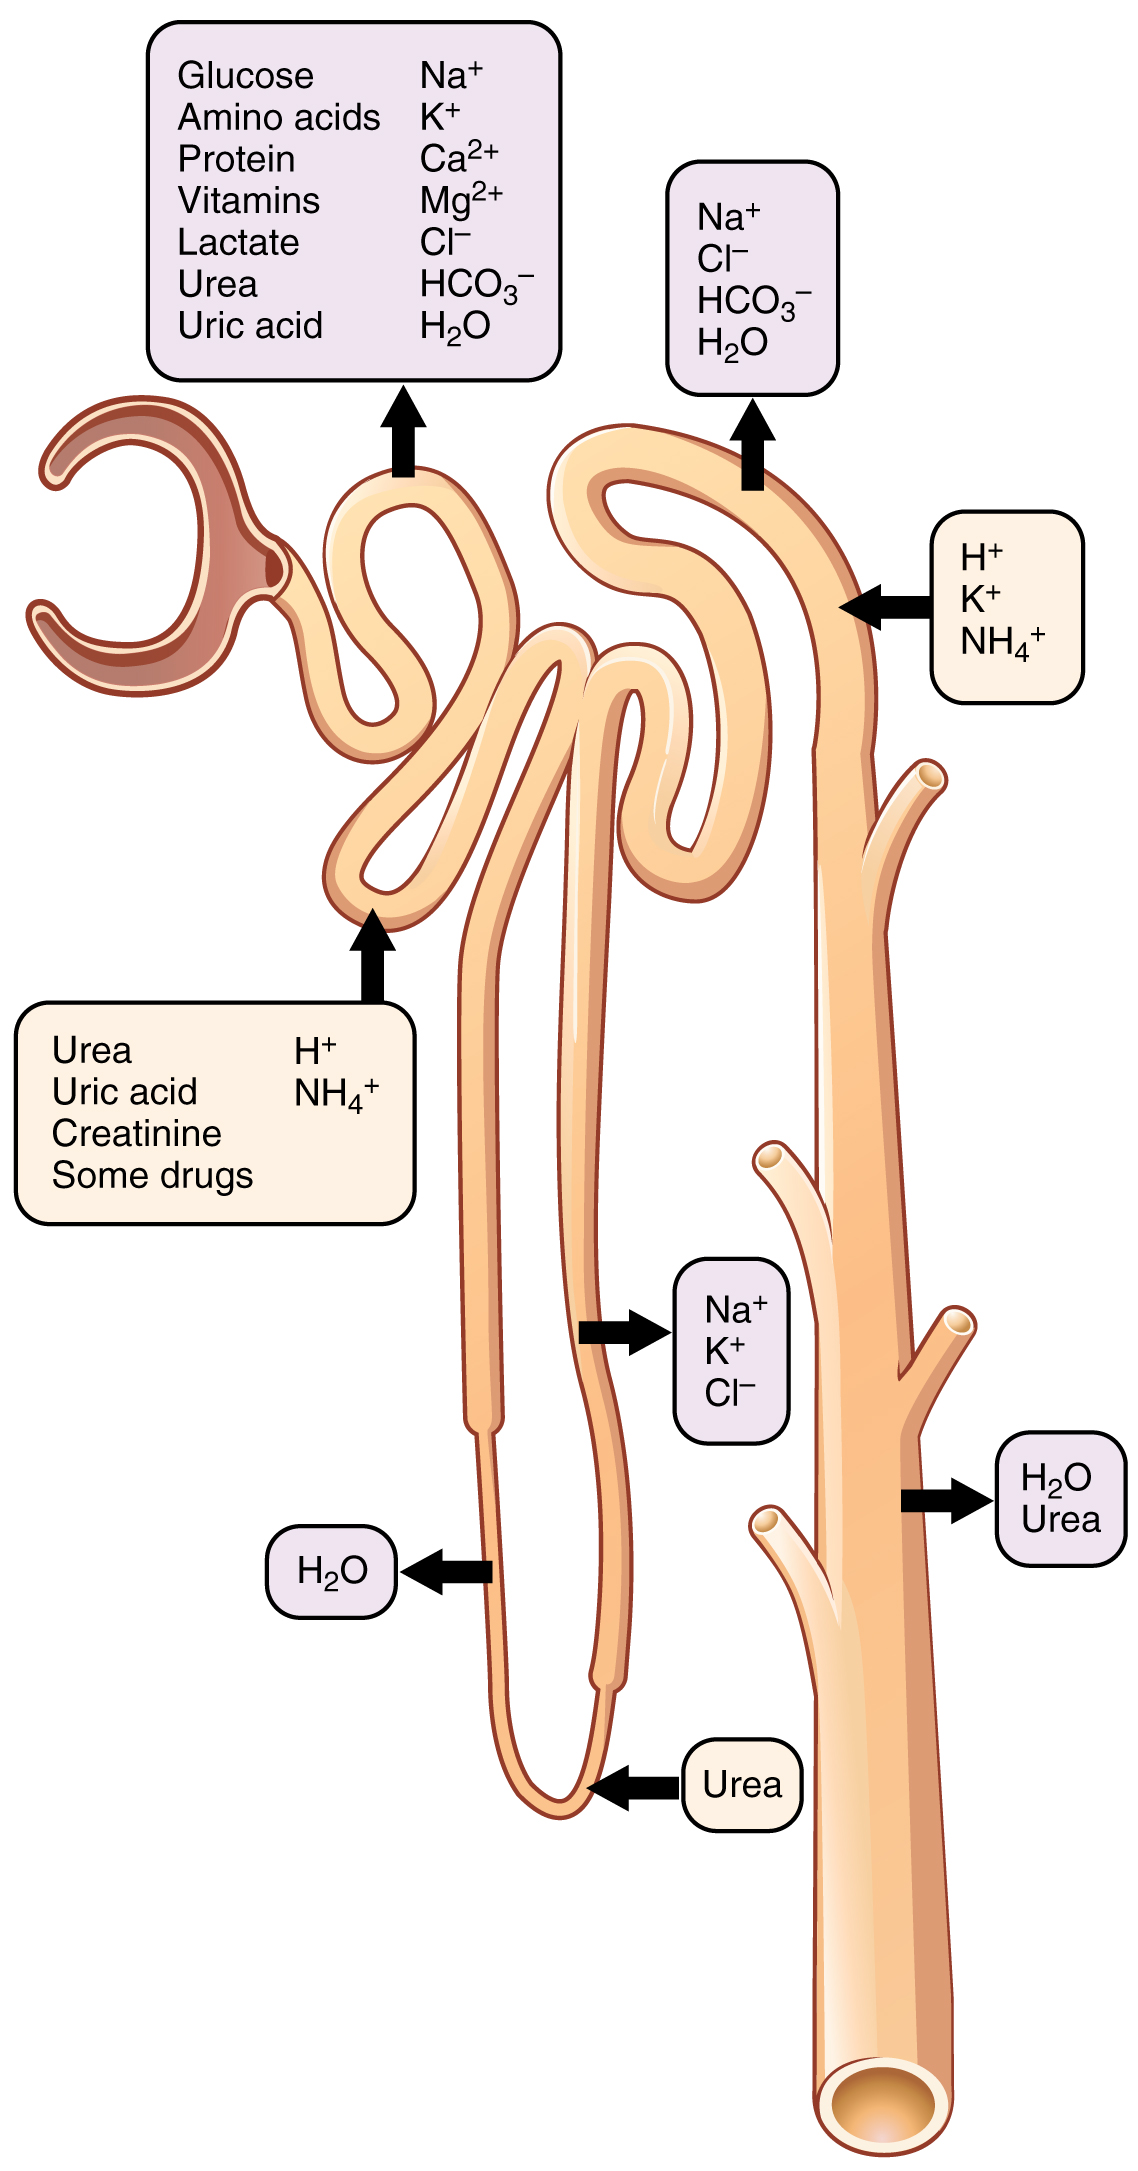 This diagram shows the different ions and chemicals that are secreted and reabsorbed along the nephron. Arrows show the direction of the movement of the substance.